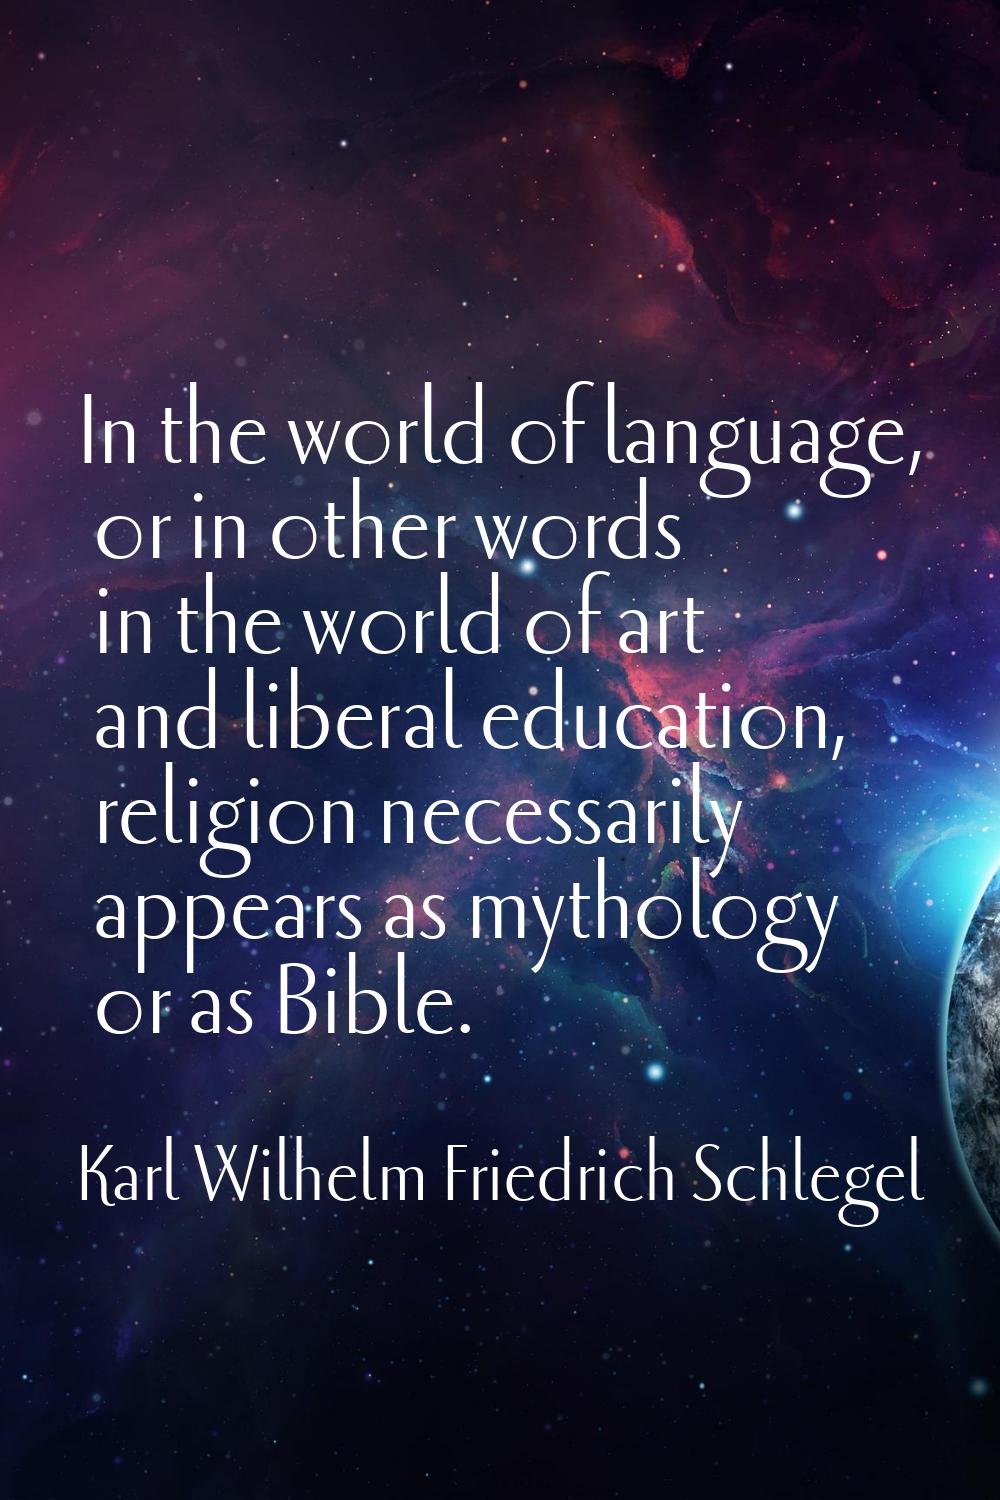 In the world of language, or in other words in the world of art and liberal education, religion nec